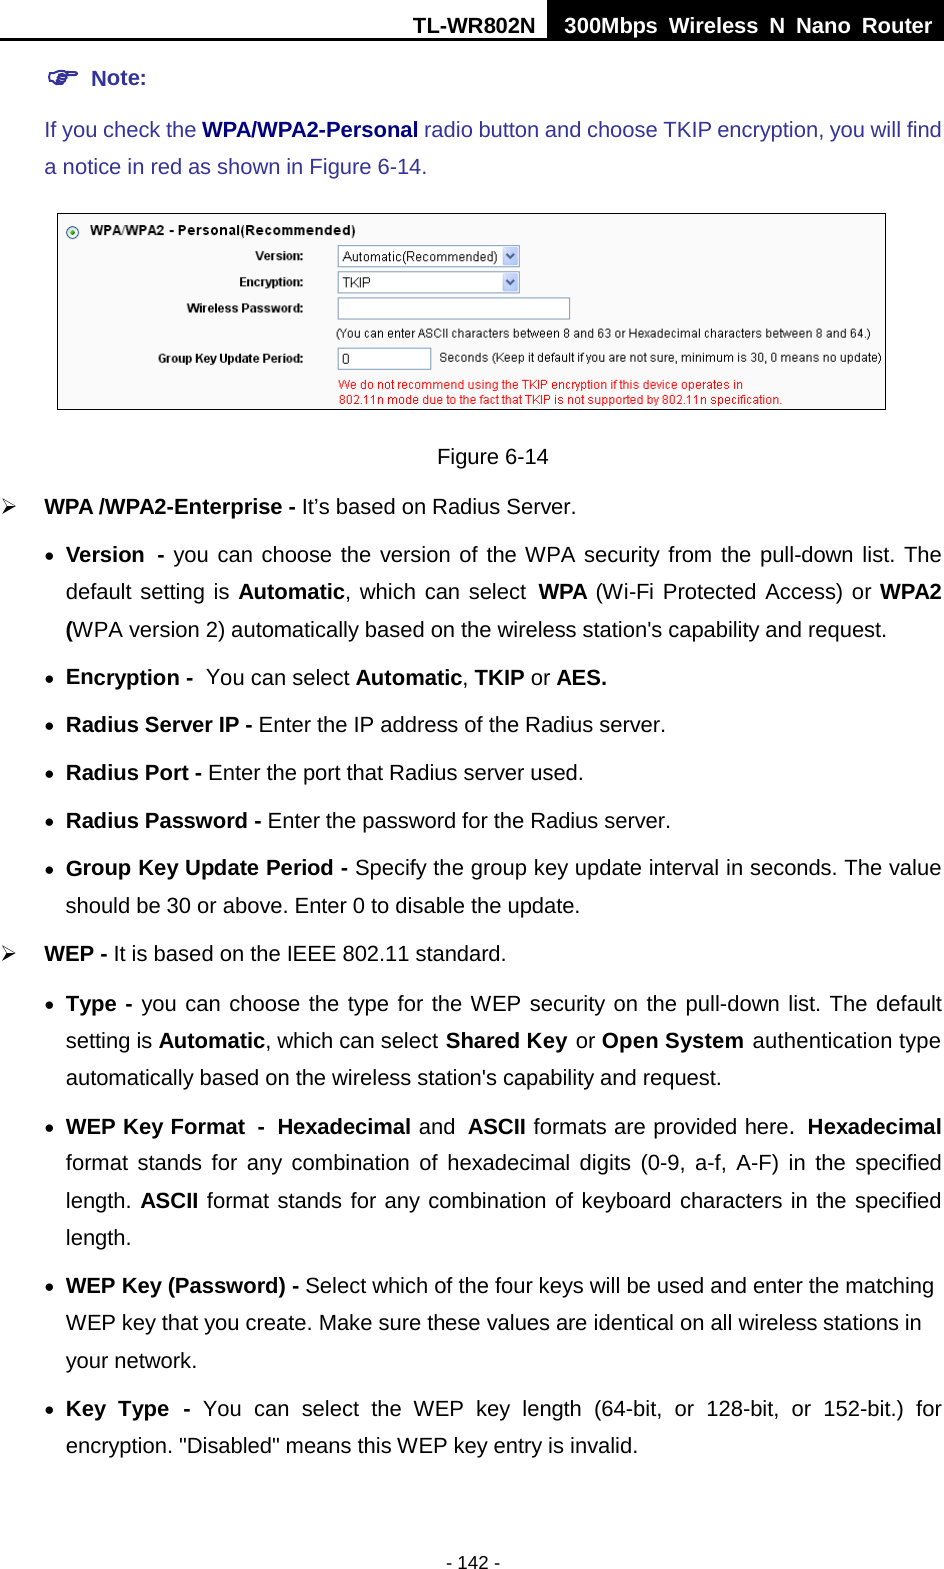 TL-WR802N  300Mbps Wireless N Nano Router   Note:   If you check the WPA/WPA2-Personal radio button and choose TKIP encryption, you will find a notice in red as shown in Figure 6-14.  Figure 6-14  WPA /WPA2-Enterprise - It’s based on Radius Server. • Version - you can choose the version of the WPA security from the pull-down list. The default setting is Automatic, which can select WPA (Wi-Fi Protected Access) or WPA2 (WPA version 2) automatically based on the wireless station&apos;s capability and request. • Encryption - You can select Automatic, TKIP or AES. • Radius Server IP - Enter the IP address of the Radius server. • Radius Port - Enter the port that Radius server used. • Radius Password - Enter the password for the Radius server. • Group Key Update Period - Specify the group key update interval in seconds. The value should be 30 or above. Enter 0 to disable the update.  WEP - It is based on the IEEE 802.11 standard.   • Type - you can choose the type for the WEP security on the pull-down list. The default setting is Automatic, which can select Shared Key or Open System authentication type automatically based on the wireless station&apos;s capability and request. • WEP Key Format - Hexadecimal and ASCII formats are provided here. Hexadecimal format stands for any combination of hexadecimal digits (0-9, a-f, A-F) in the specified length. ASCII format stands for any combination of keyboard characters in the specified length.   • WEP Key (Password) - Select which of the four keys will be used and enter the matching WEP key that you create. Make sure these values are identical on all wireless stations in your network.   • Key Type - You can select the WEP key length (64-bit, or 128-bit,  or 152-bit.) for encryption. &quot;Disabled&quot; means this WEP key entry is invalid. - 142 - 